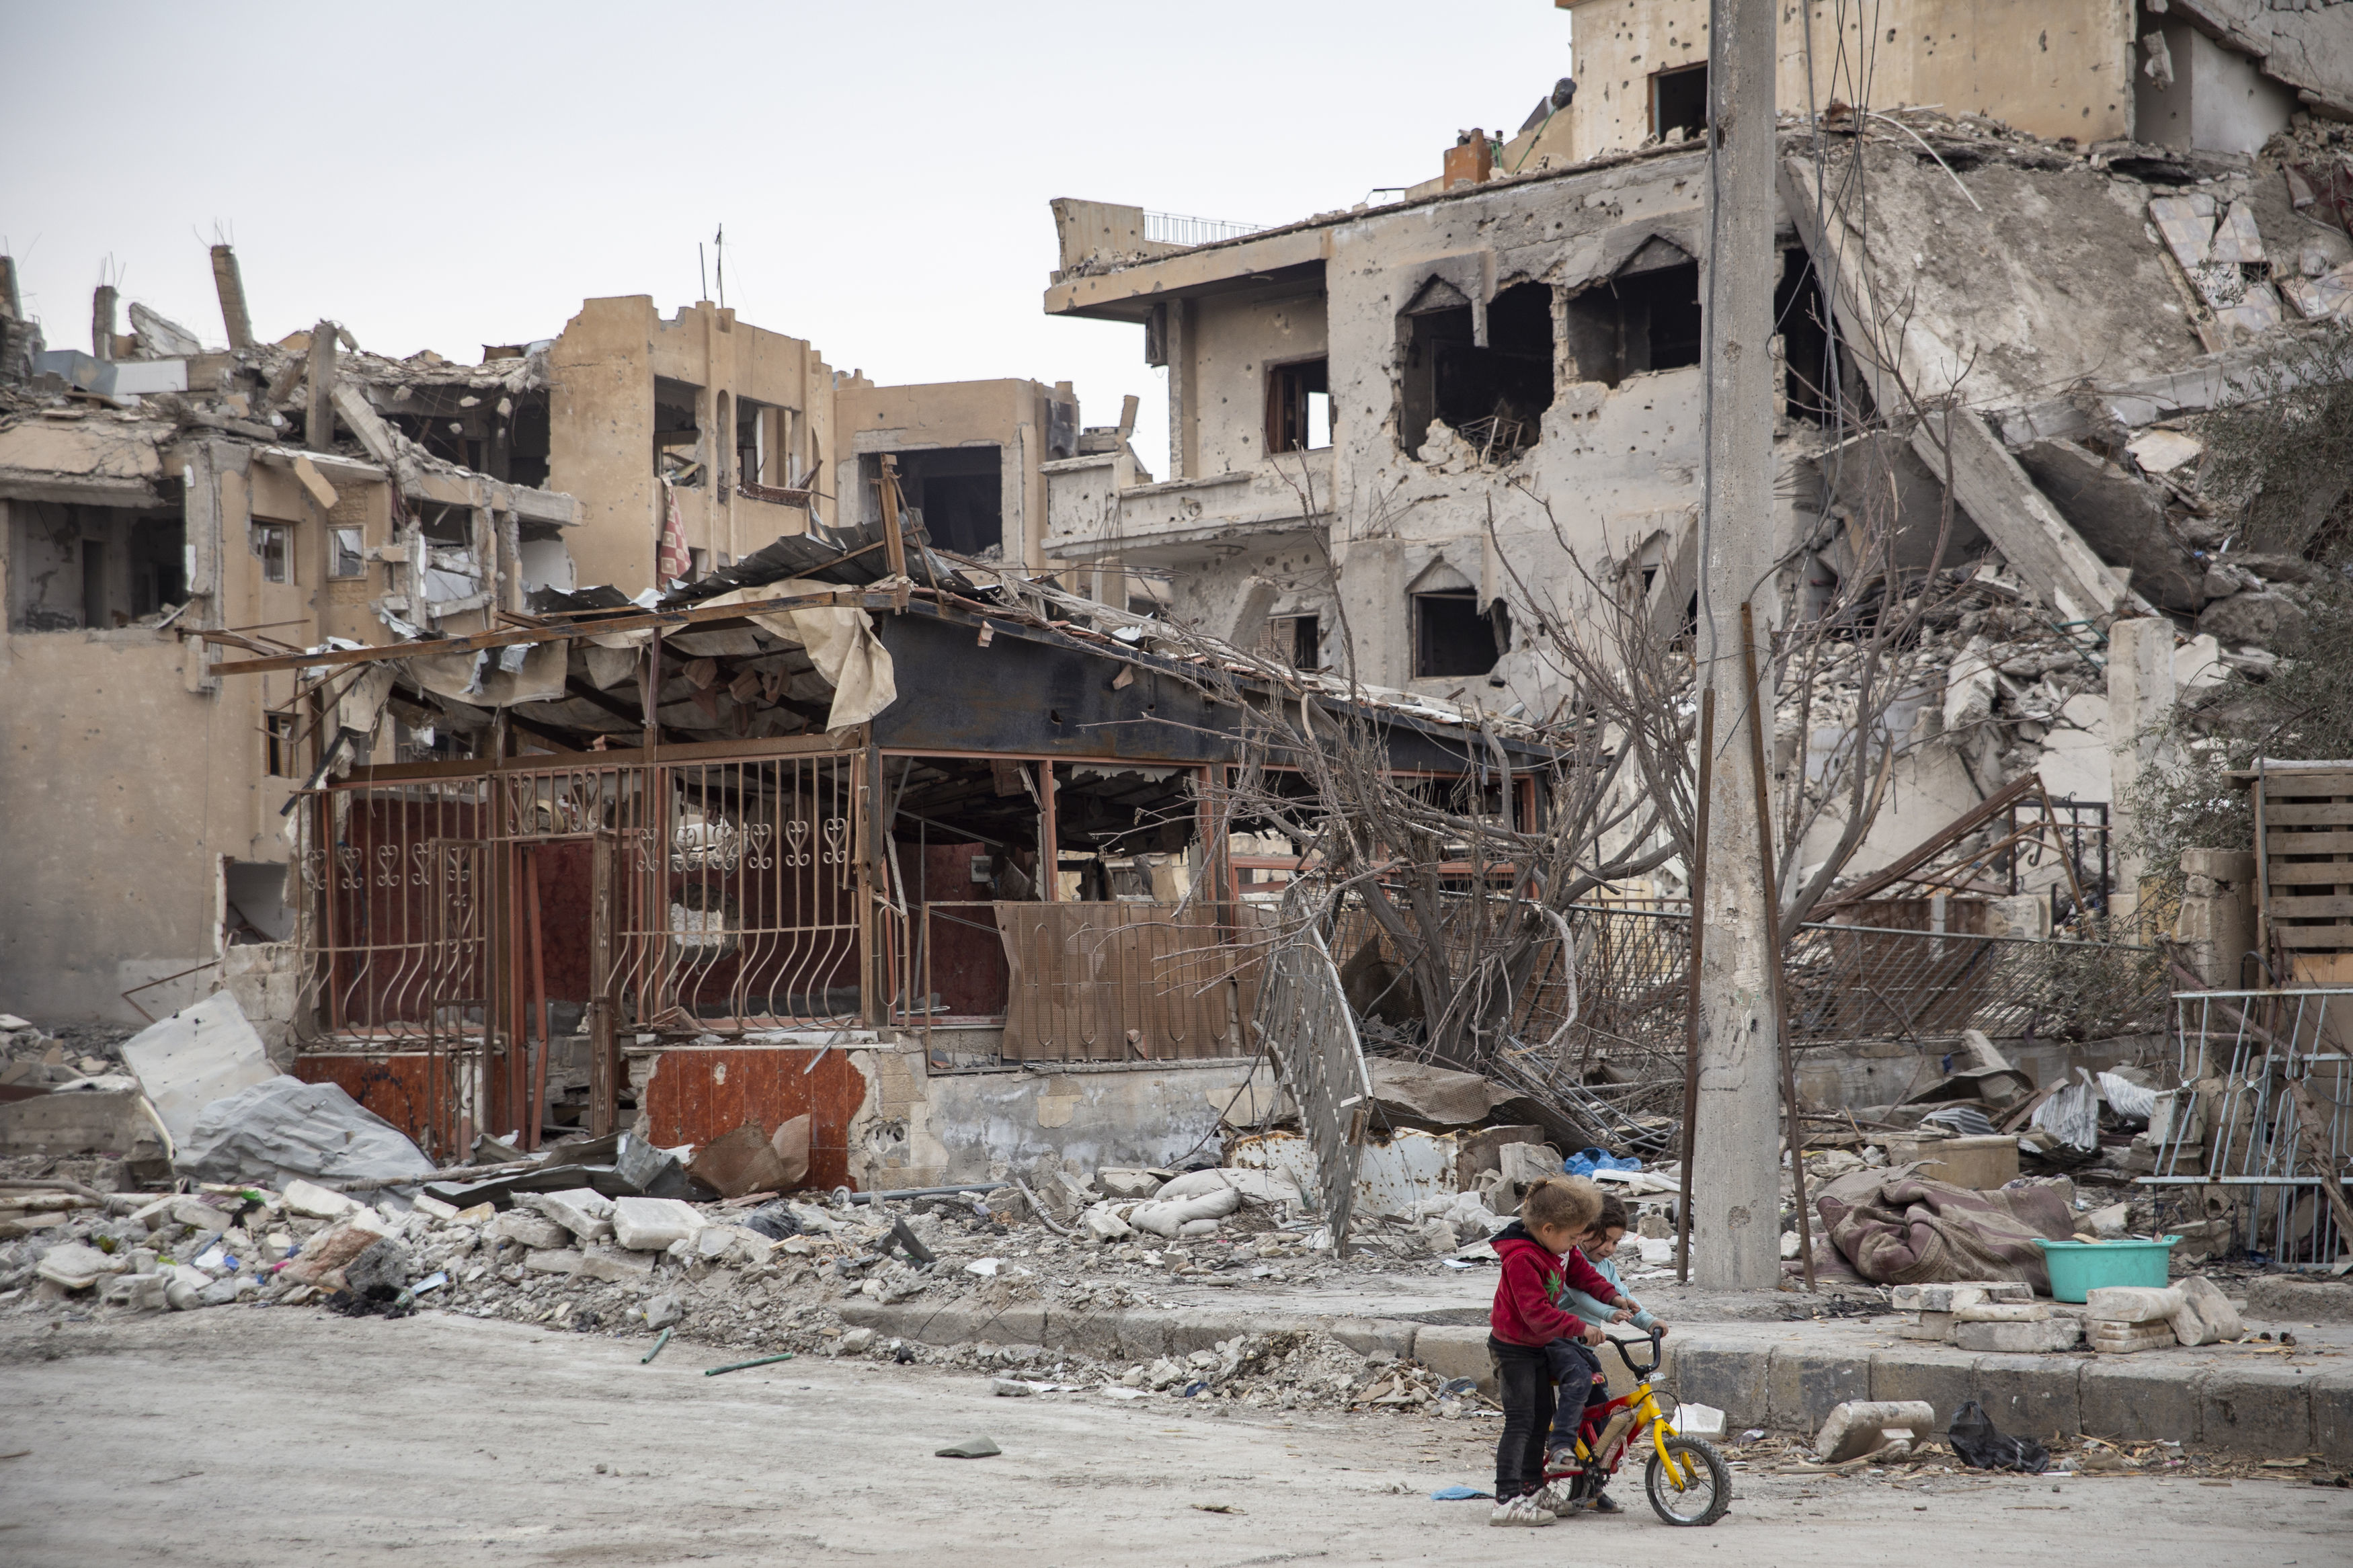 Children riding a bicycle next to destroyed buildings in Raqqa 